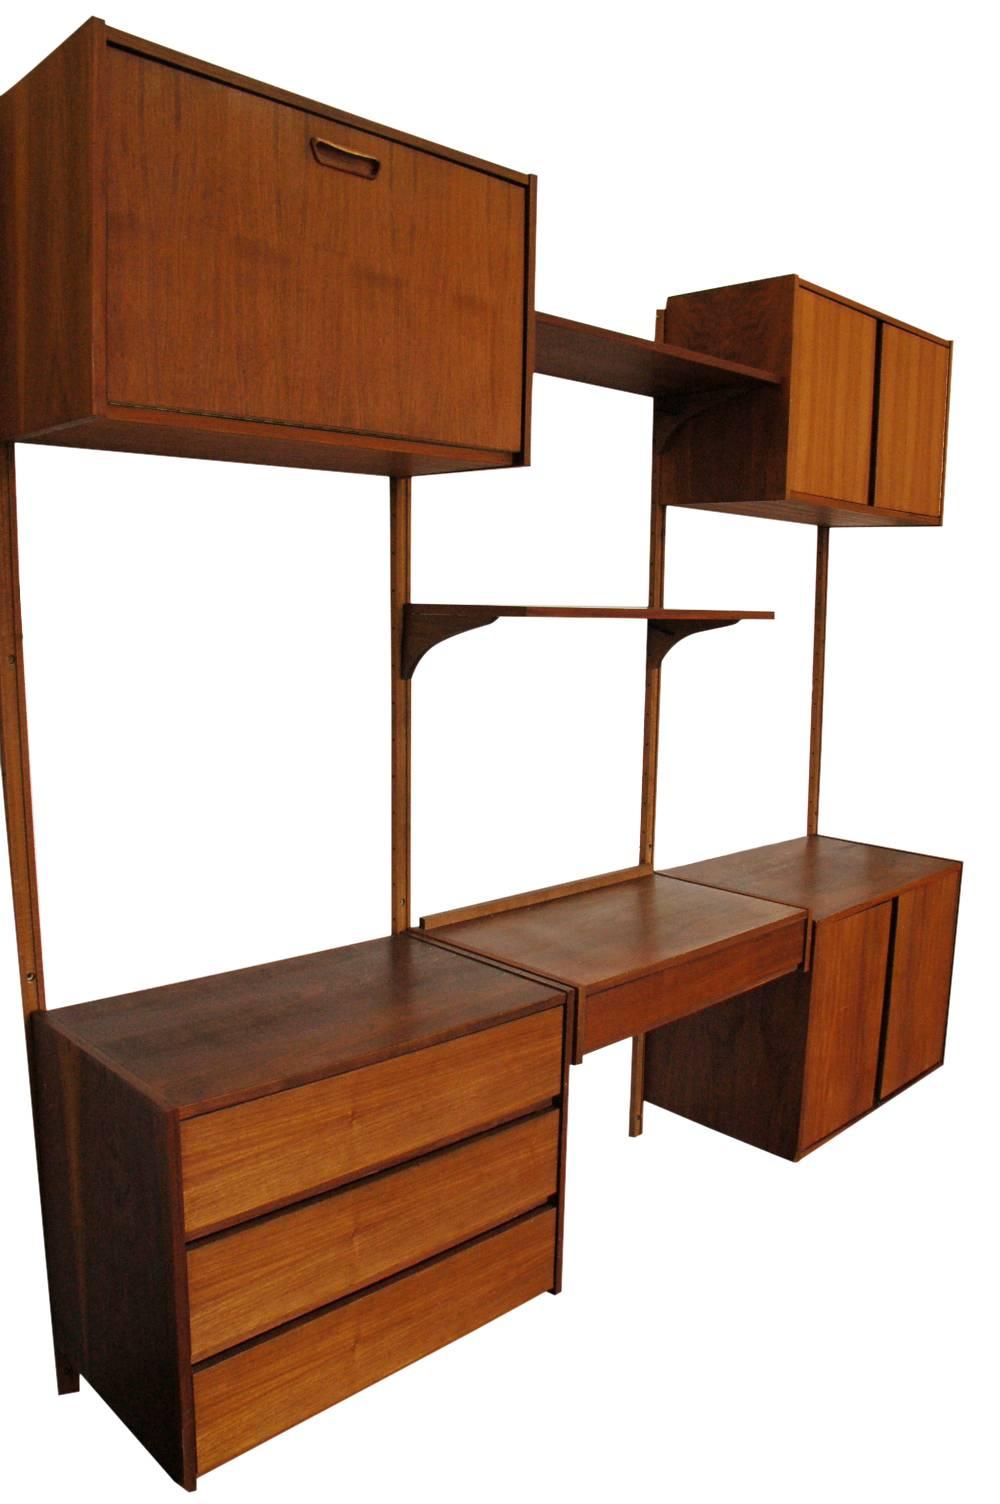 A large three-bay teak wall unit in the style of Poul 